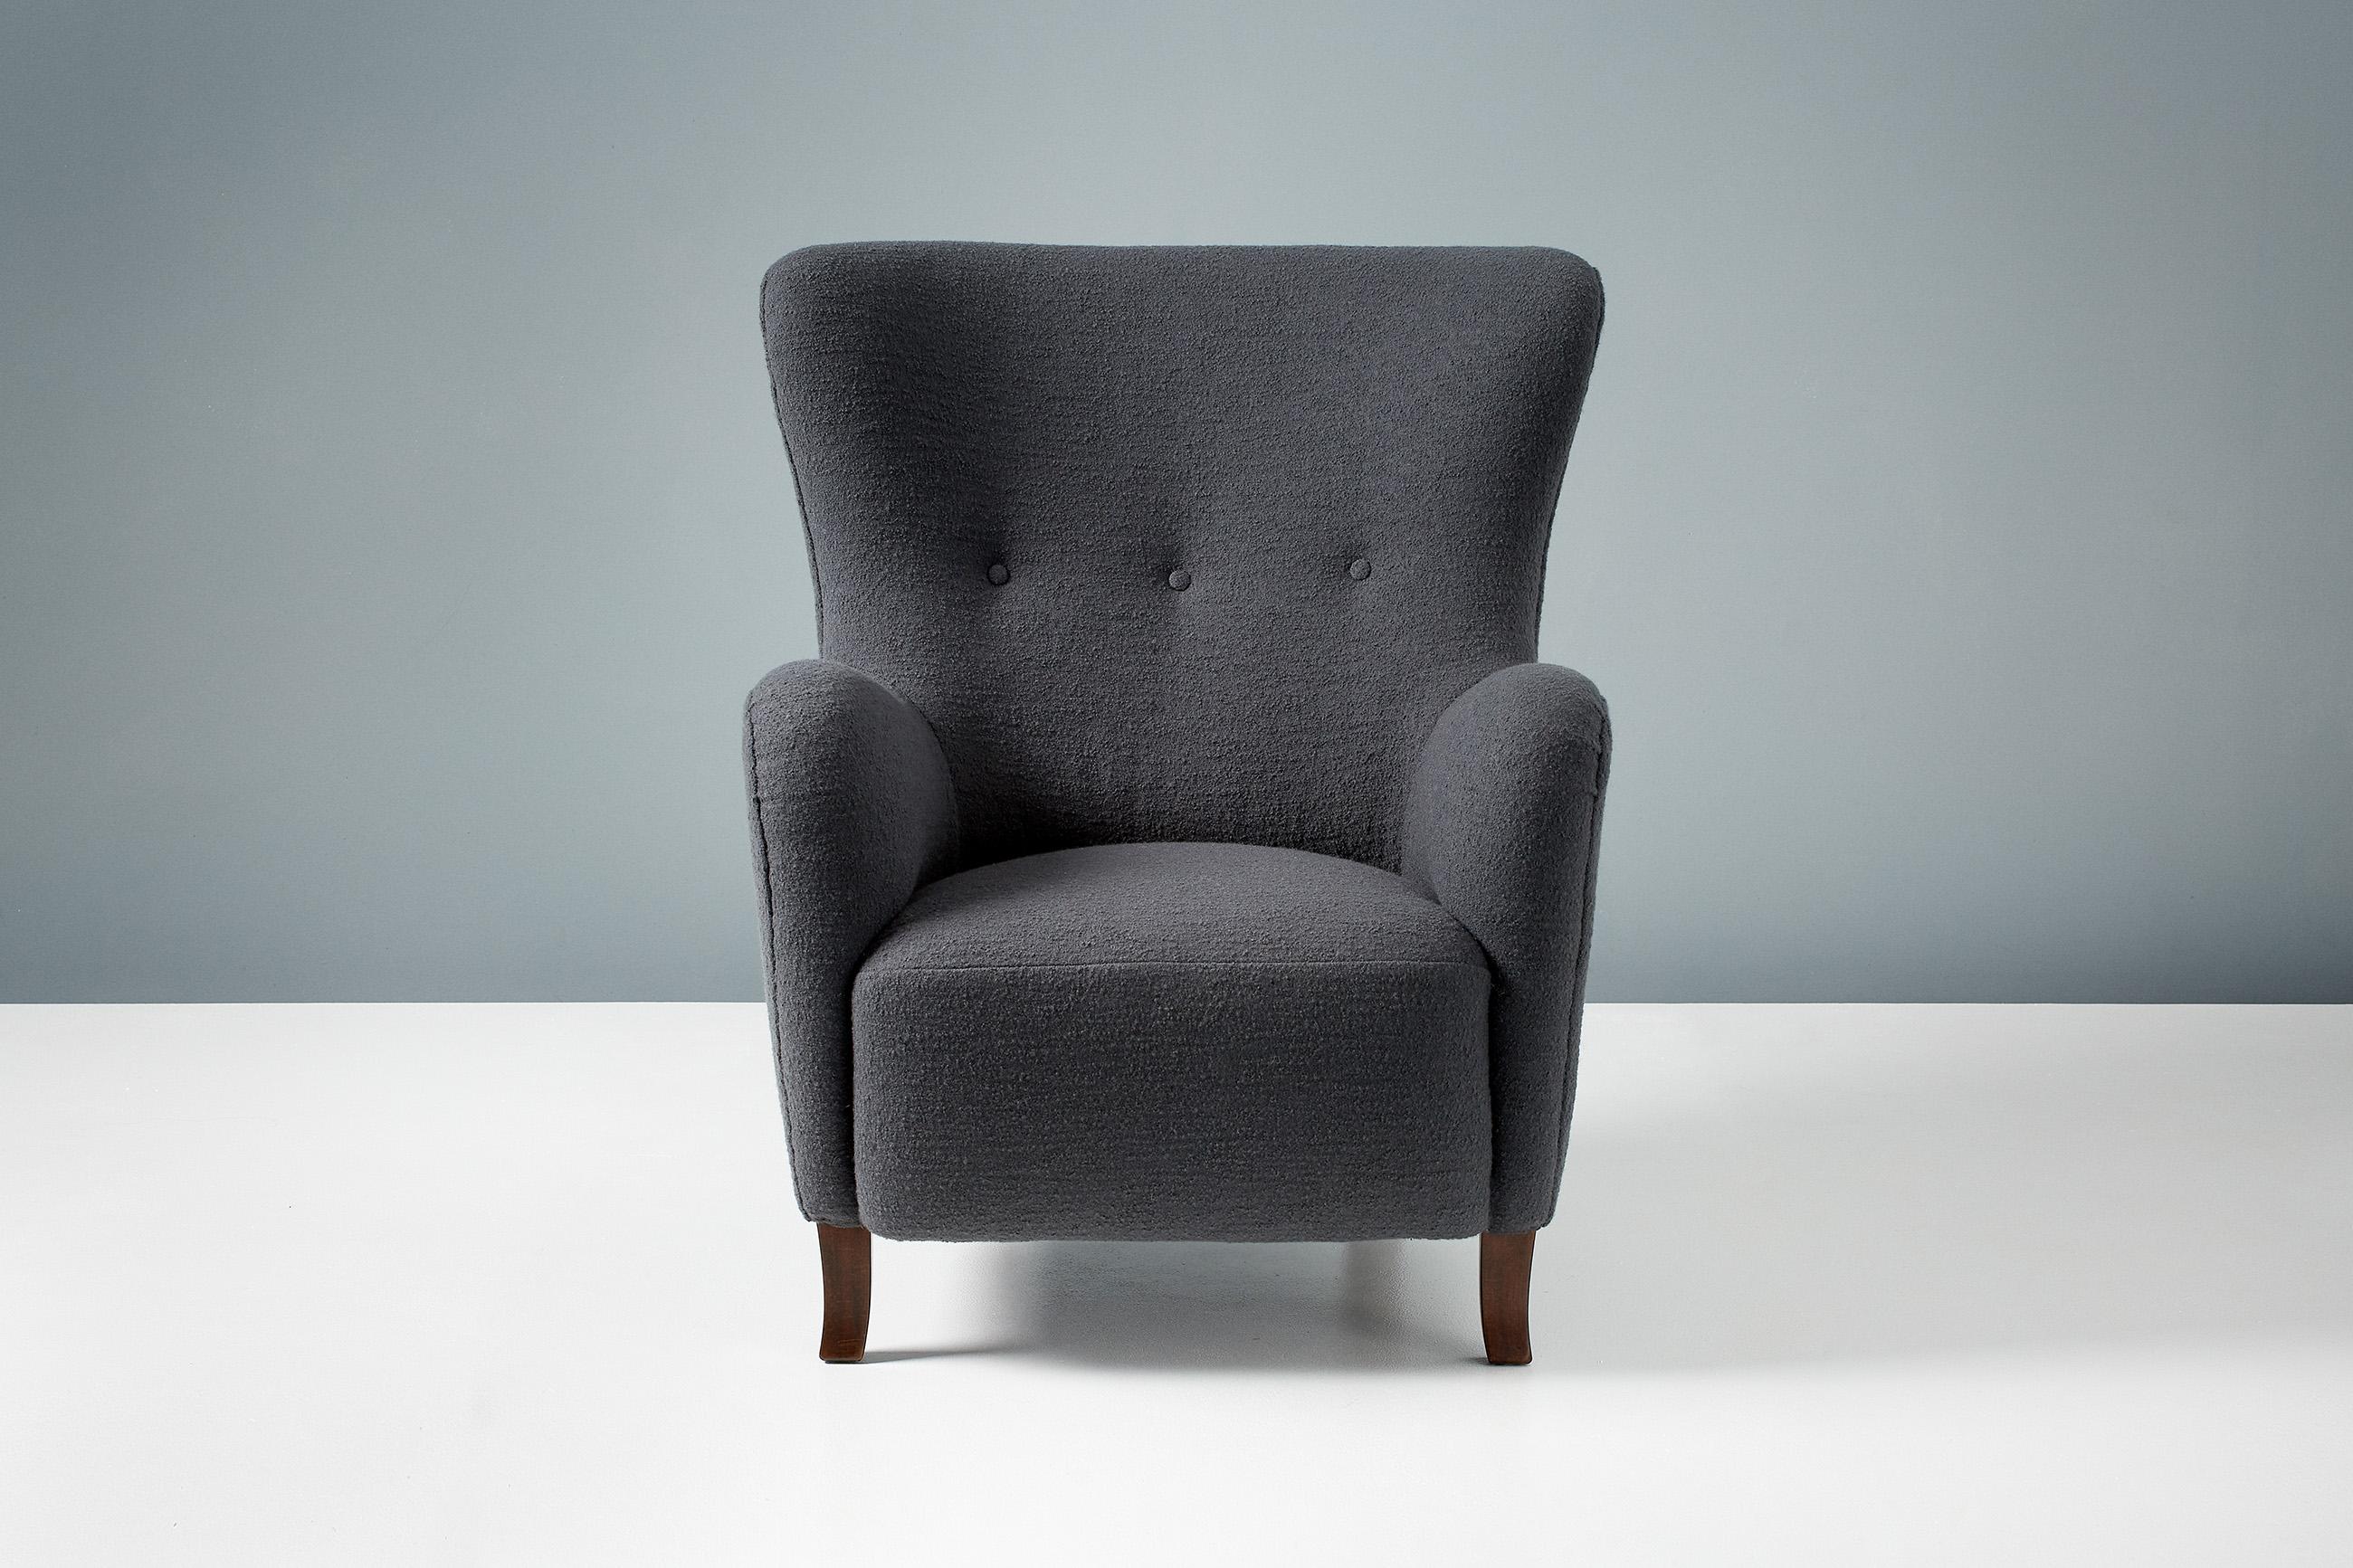 Dagmar Design

Sampo Wing Chair

A custom-made wing chair developed & produced at our workshops in London using the highest quality materials. The frame is built from solid tulipwood with a fully sprung seat. These examples are upholstered in